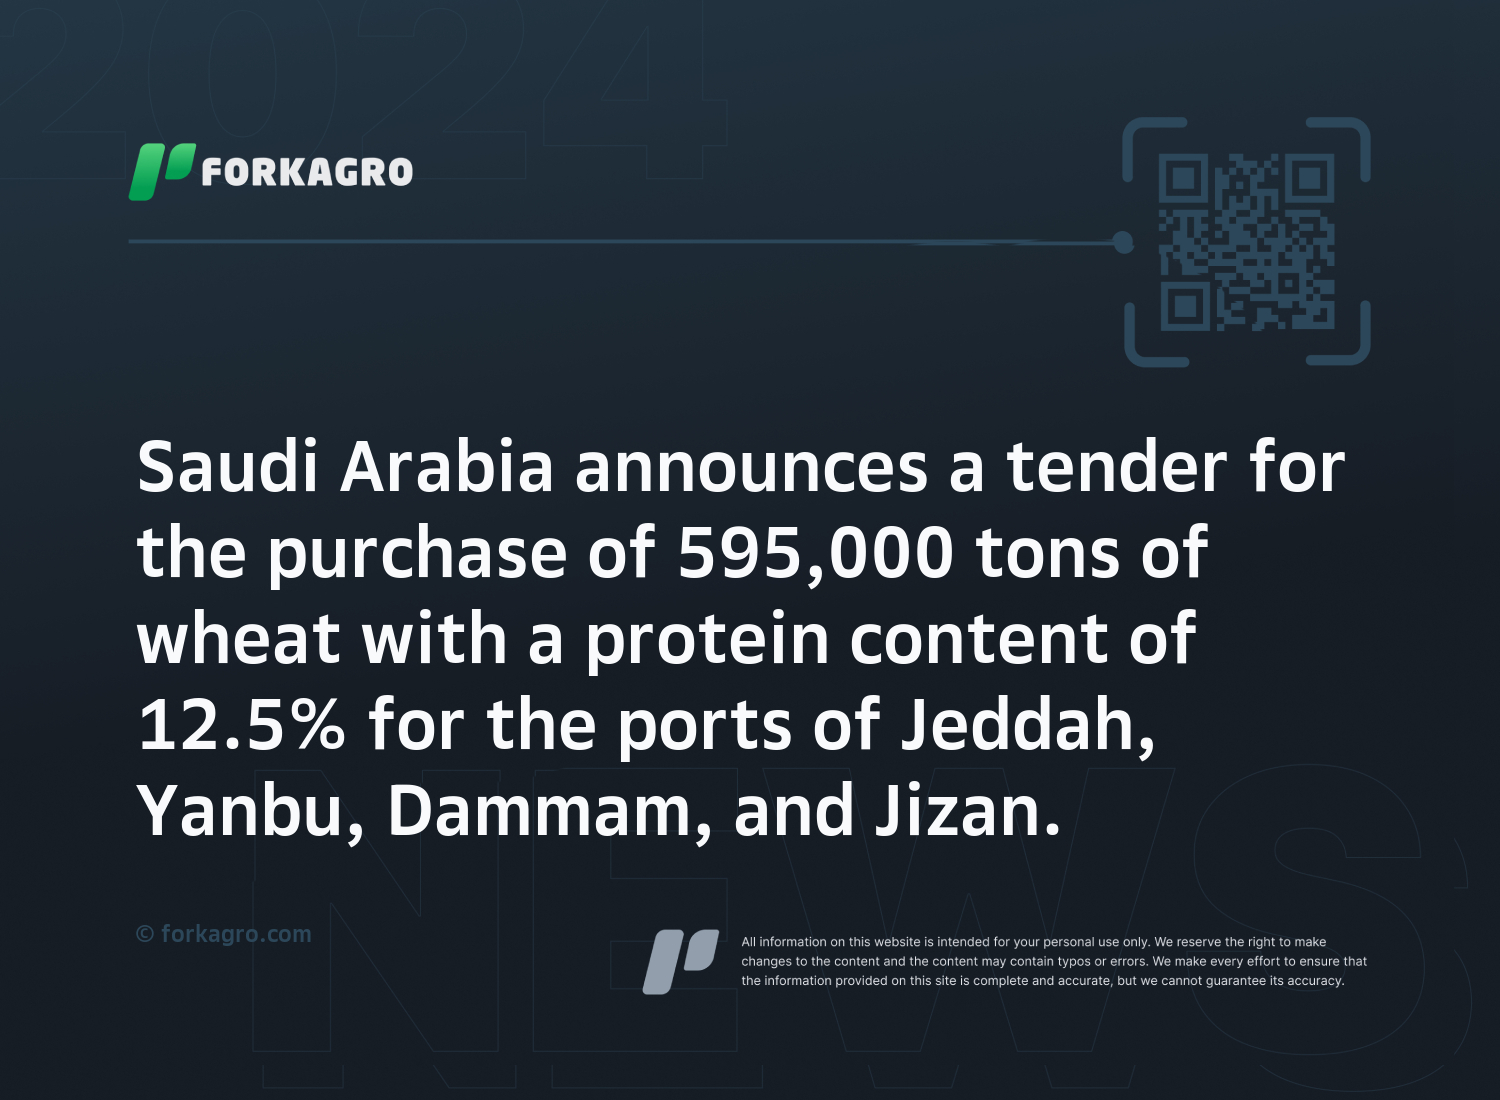 Saudi Arabia announces a tender for the purchase of 595,000 tons of wheat with a protein content of 12.5% for the ports of Jeddah, Yanbu, Dammam, and Jizan.